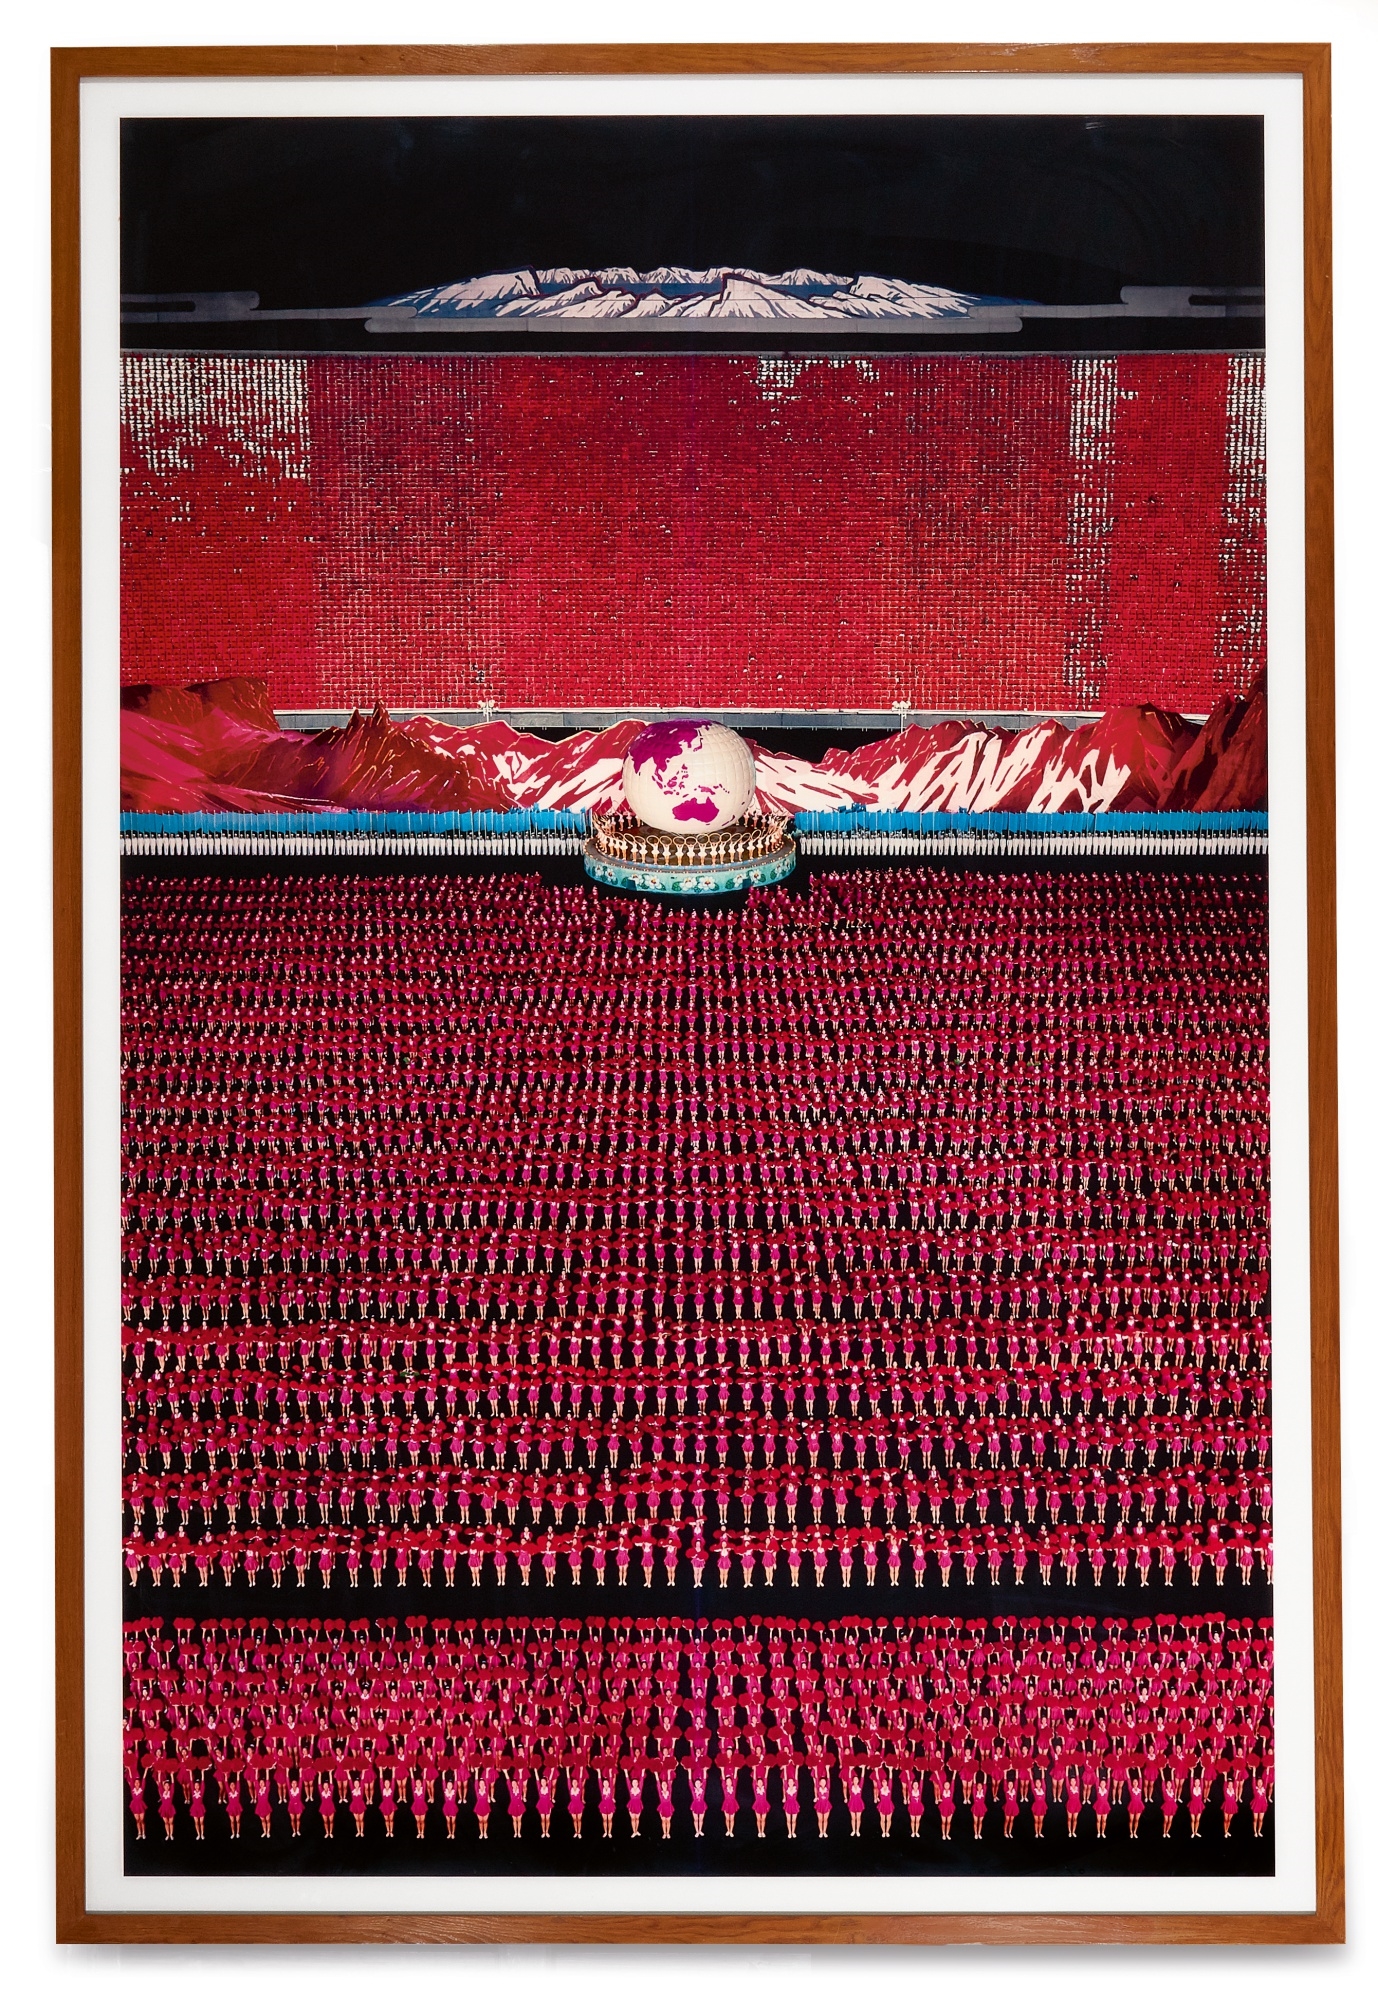 Pyongyang IV by Andreas Gursky, Executed in 2007